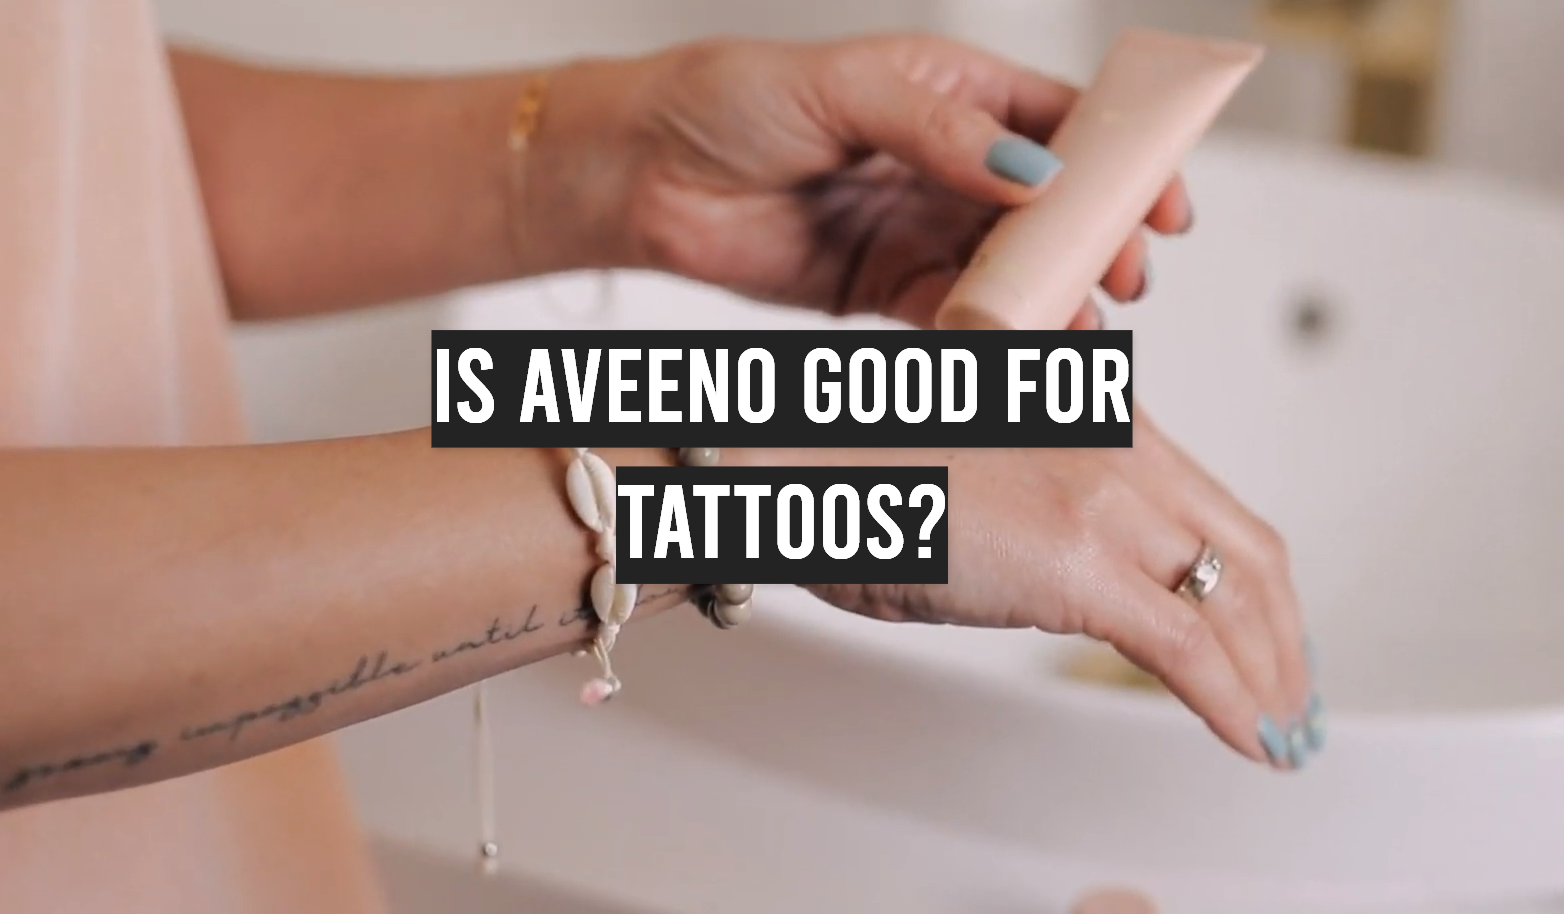 Is Aveeno Good for Tattoos?